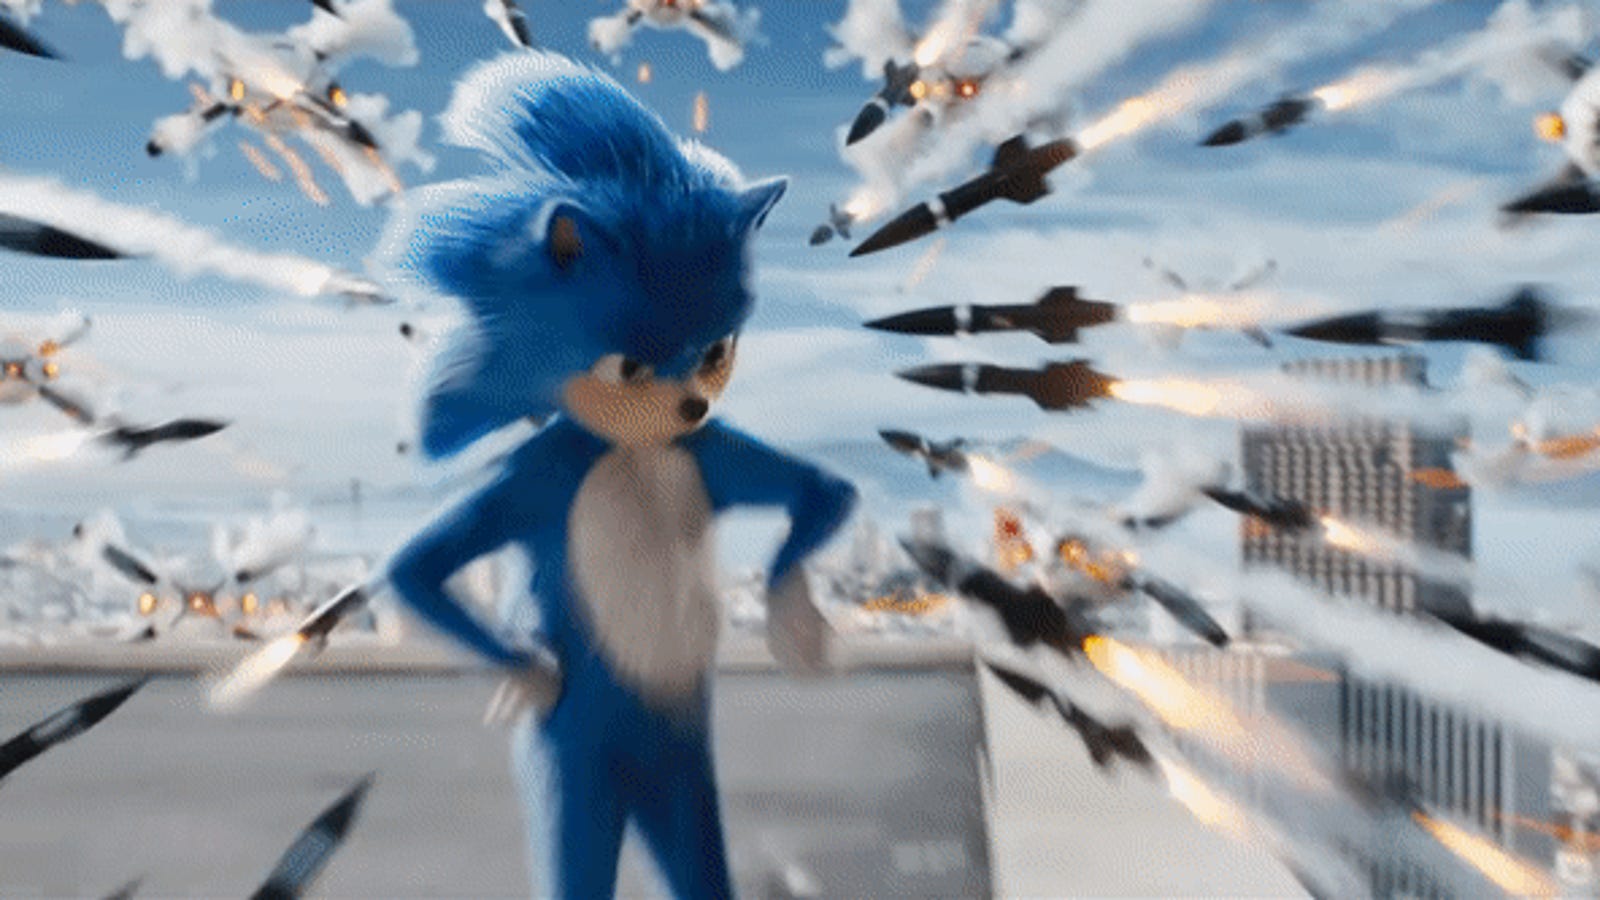 You Can't Unsee the First Sonic The Hedgehog Trailer1600 x 900